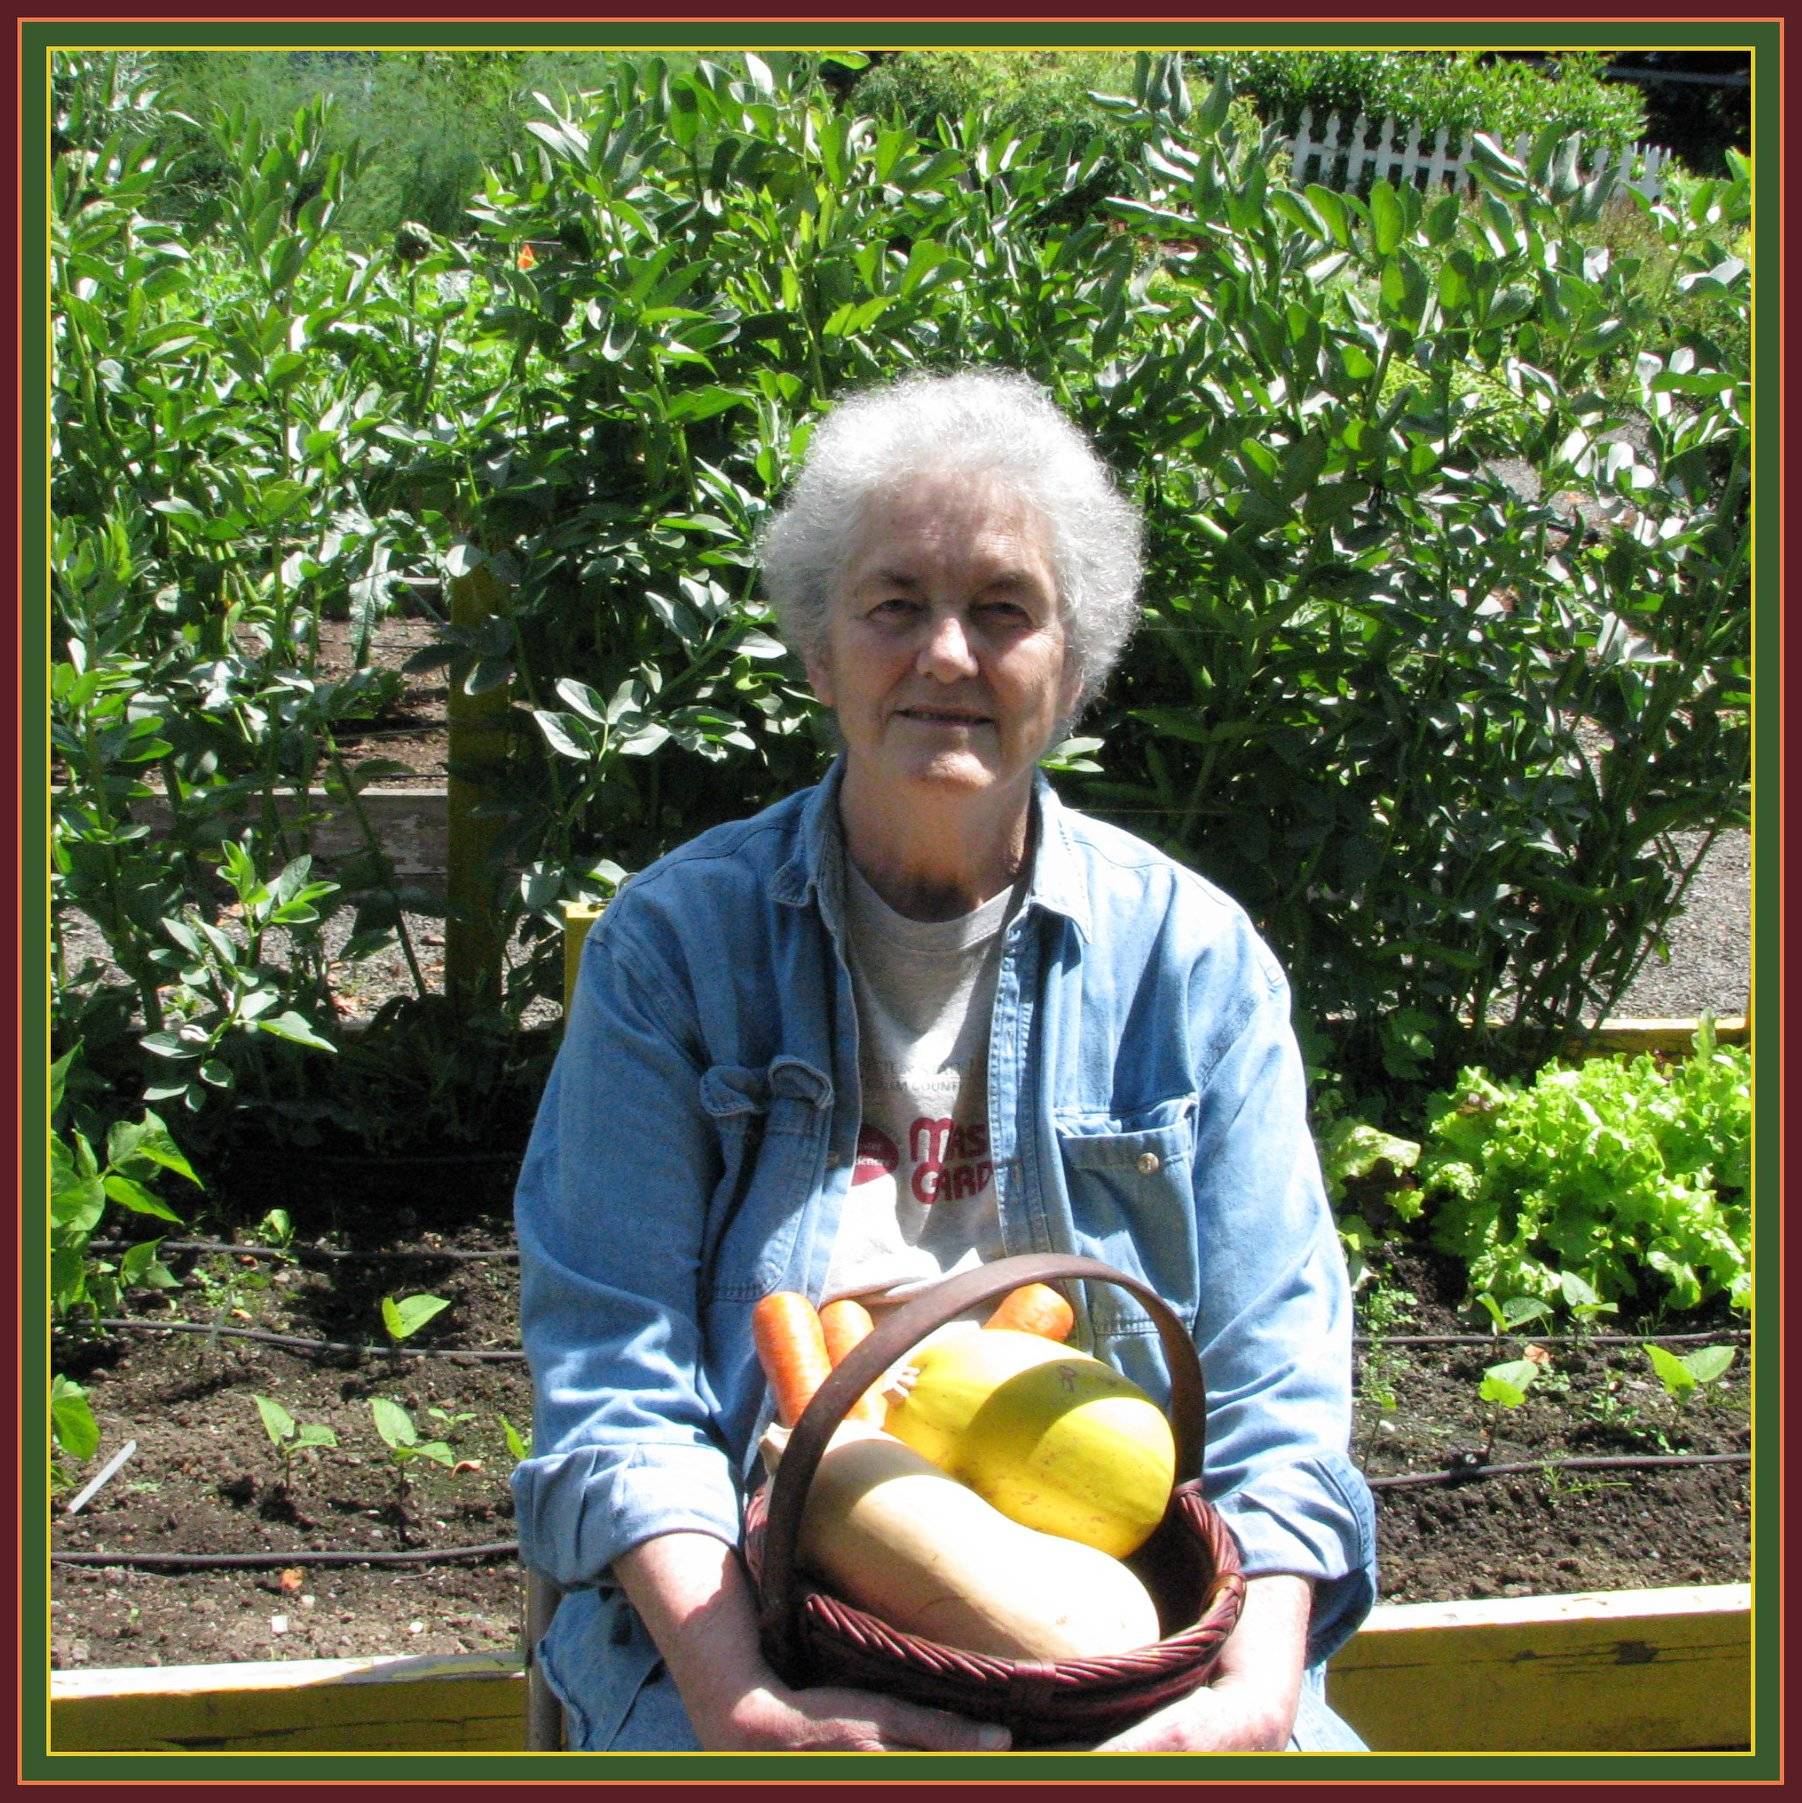 Dr. Muriel Nesbitt, who taught biology for 35 years at the University of California, San Diego, will discuss the utility and sustainability of soil amendments during her hour-long Zoom lecture, Thursday, Aug, 26 beginning at noon. Photo Credit: Archived photo